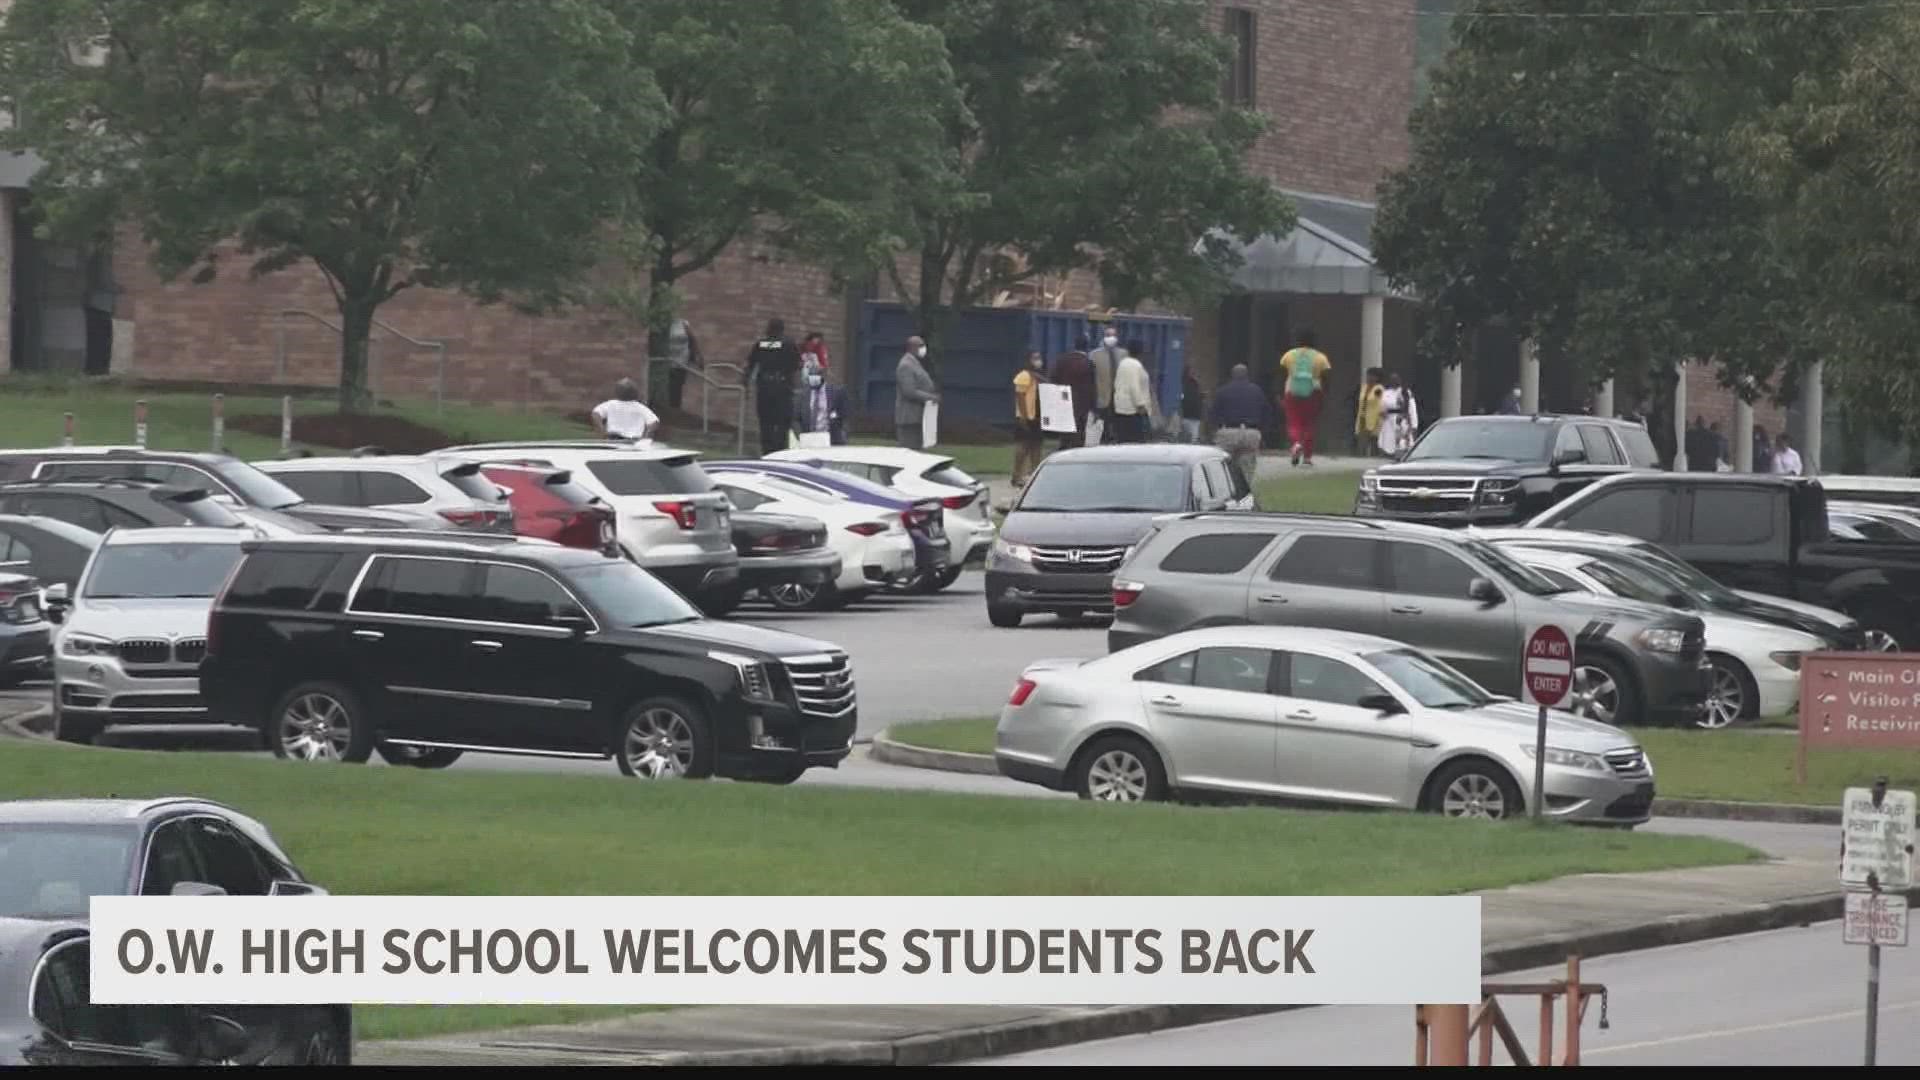 More security, clear backpacks and metal detectors are some of the additional tools in place after a shooting at Orangeburg-Wilkinson high school